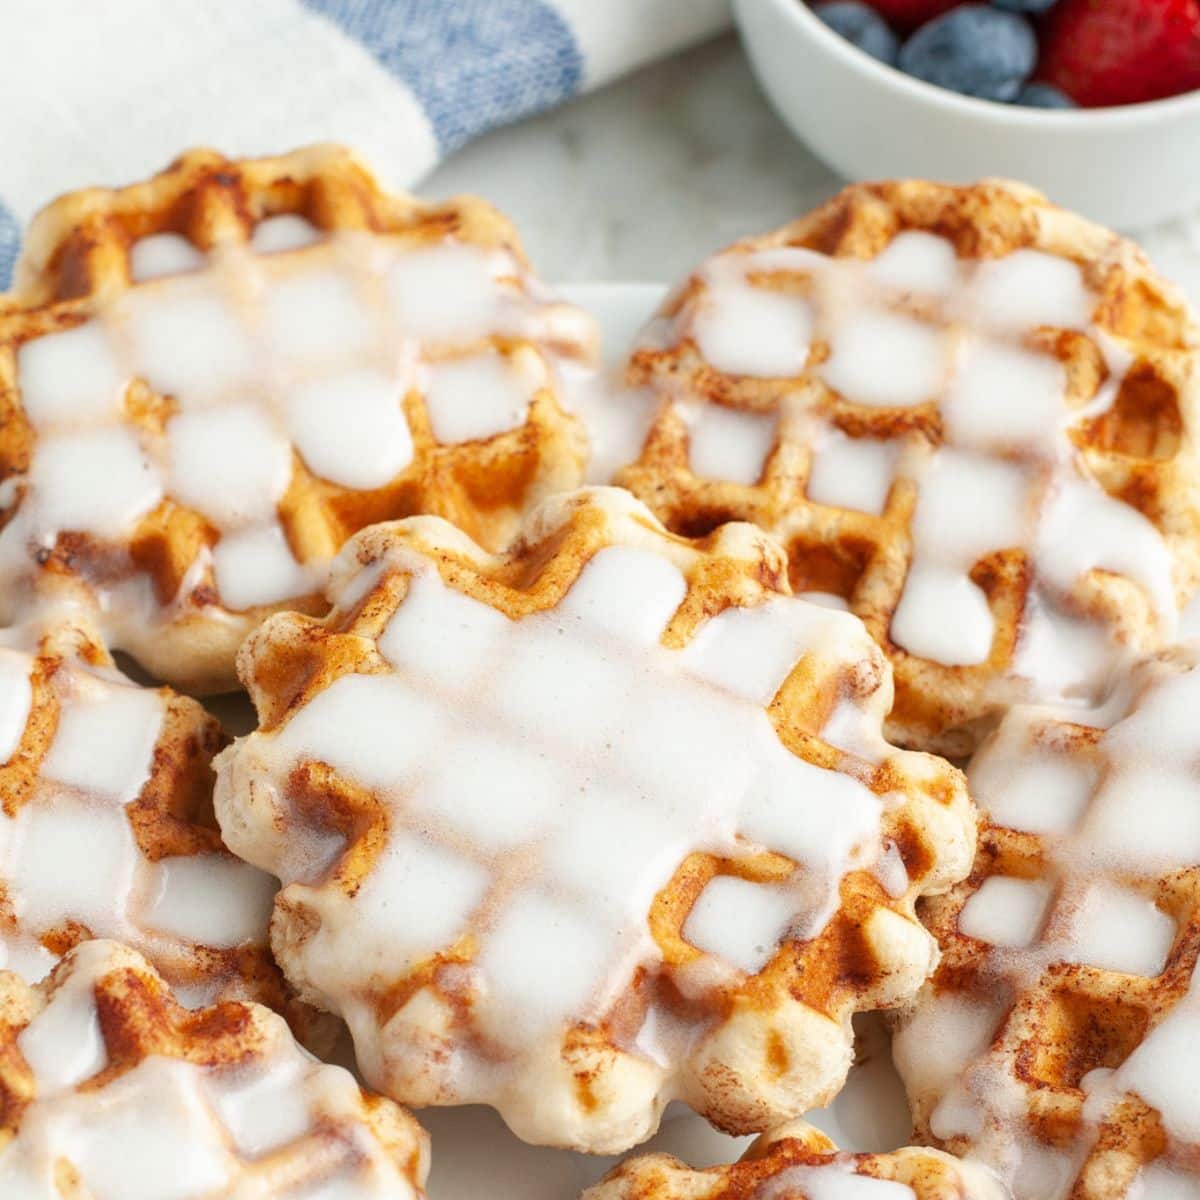 Plate of cinnamon roll waffles with icing. 